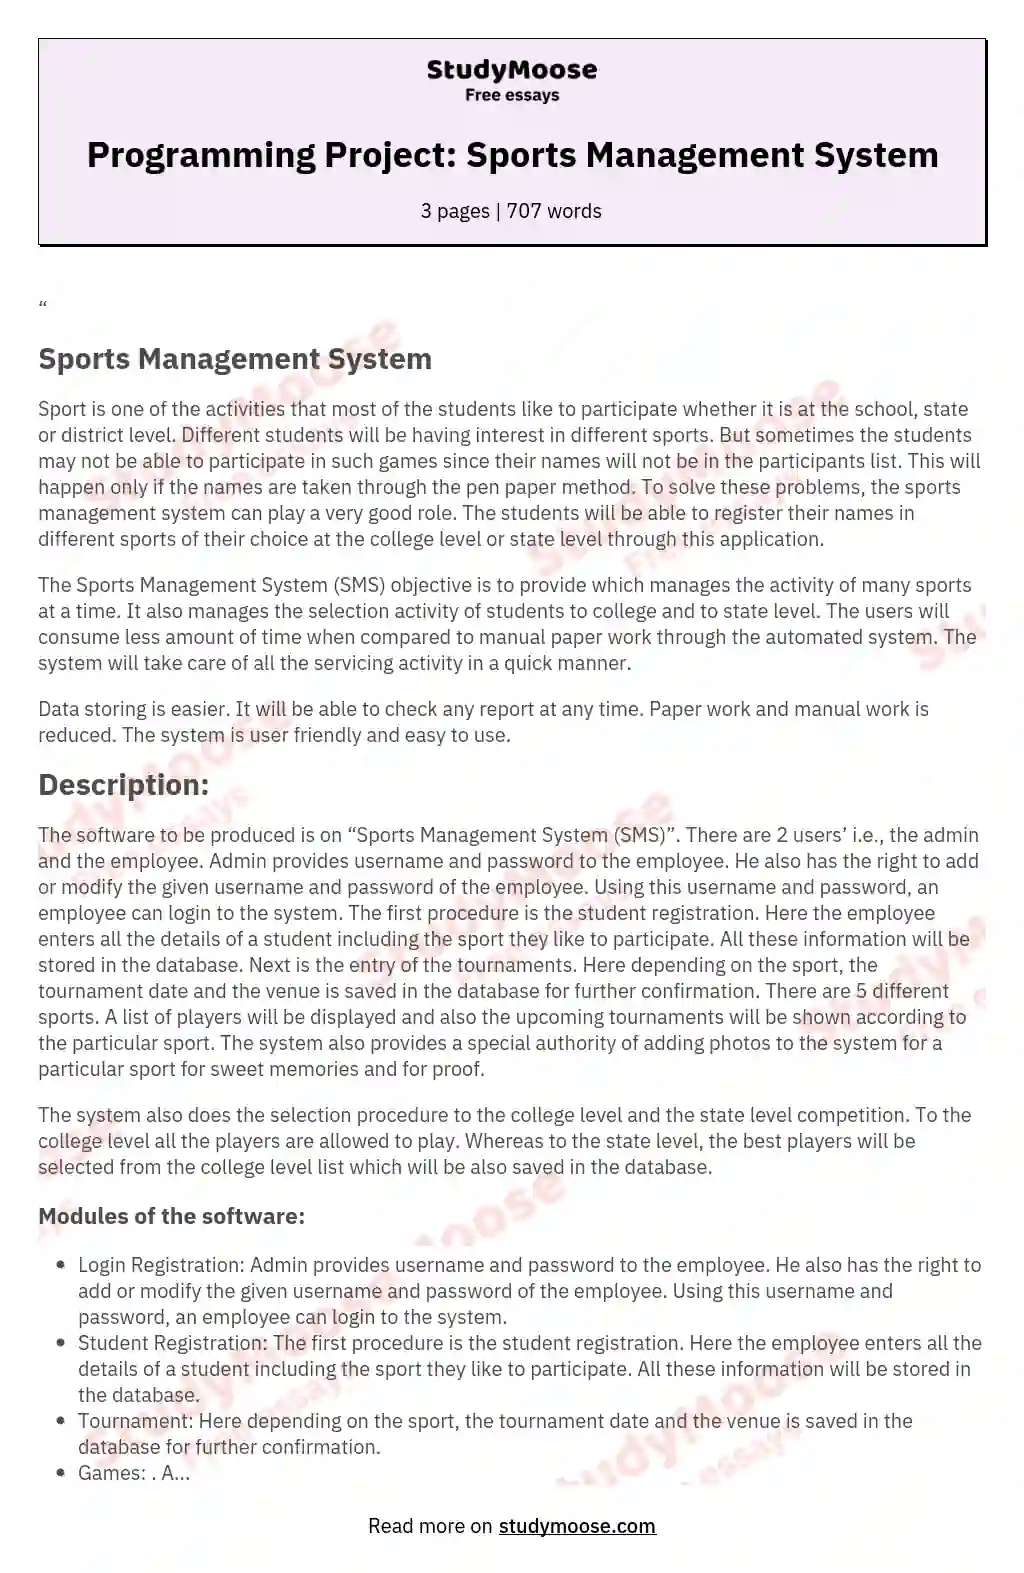 Programming Project: Sports Management System essay